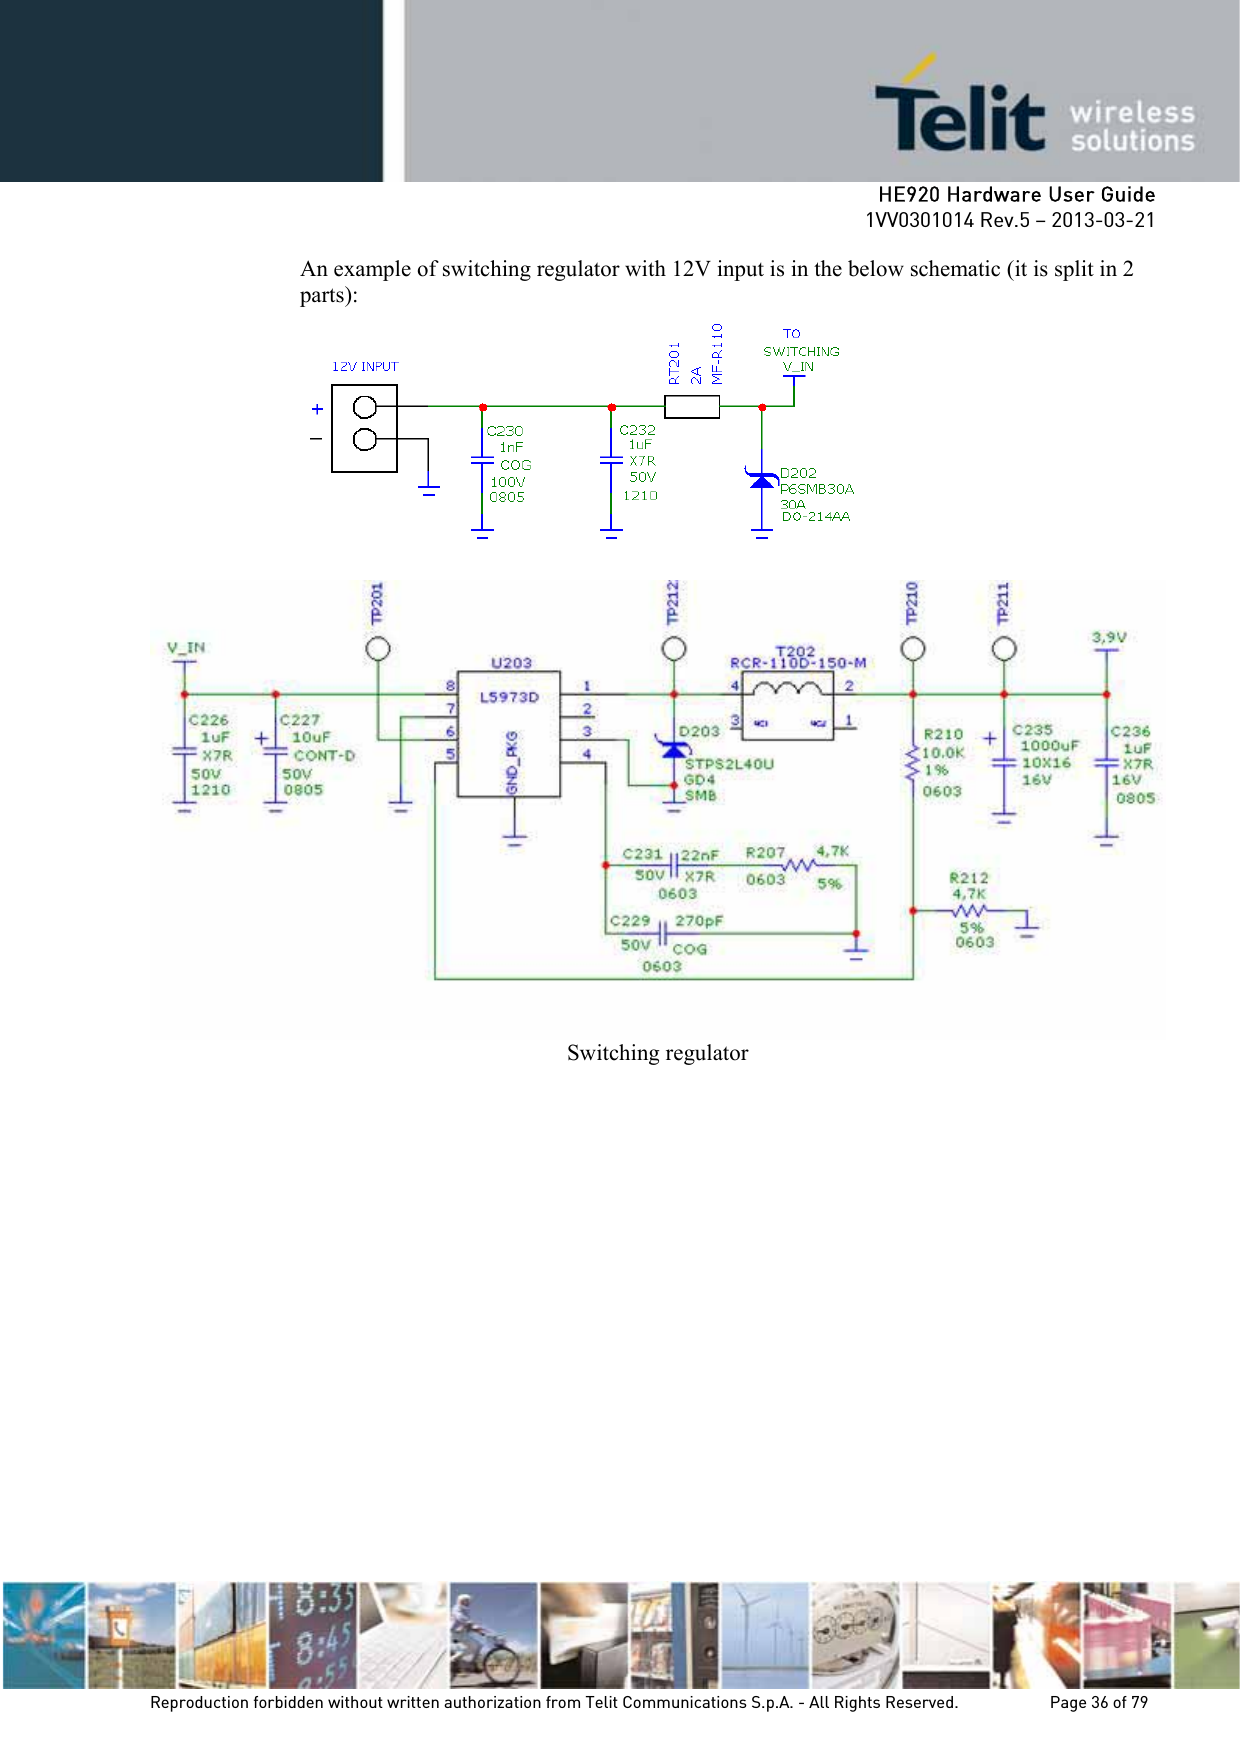     HE920 Hardware User Guide 1VV0301014 Rev.5 – 2013-03-21 Reproduction forbidden without written authorization from Telit Communications S.p.A. - All Rights Reserved.    Page 36 of 79  An example of switching regulator with 12V input is in the below schematic (it is split in 2 parts):  Switching regulator